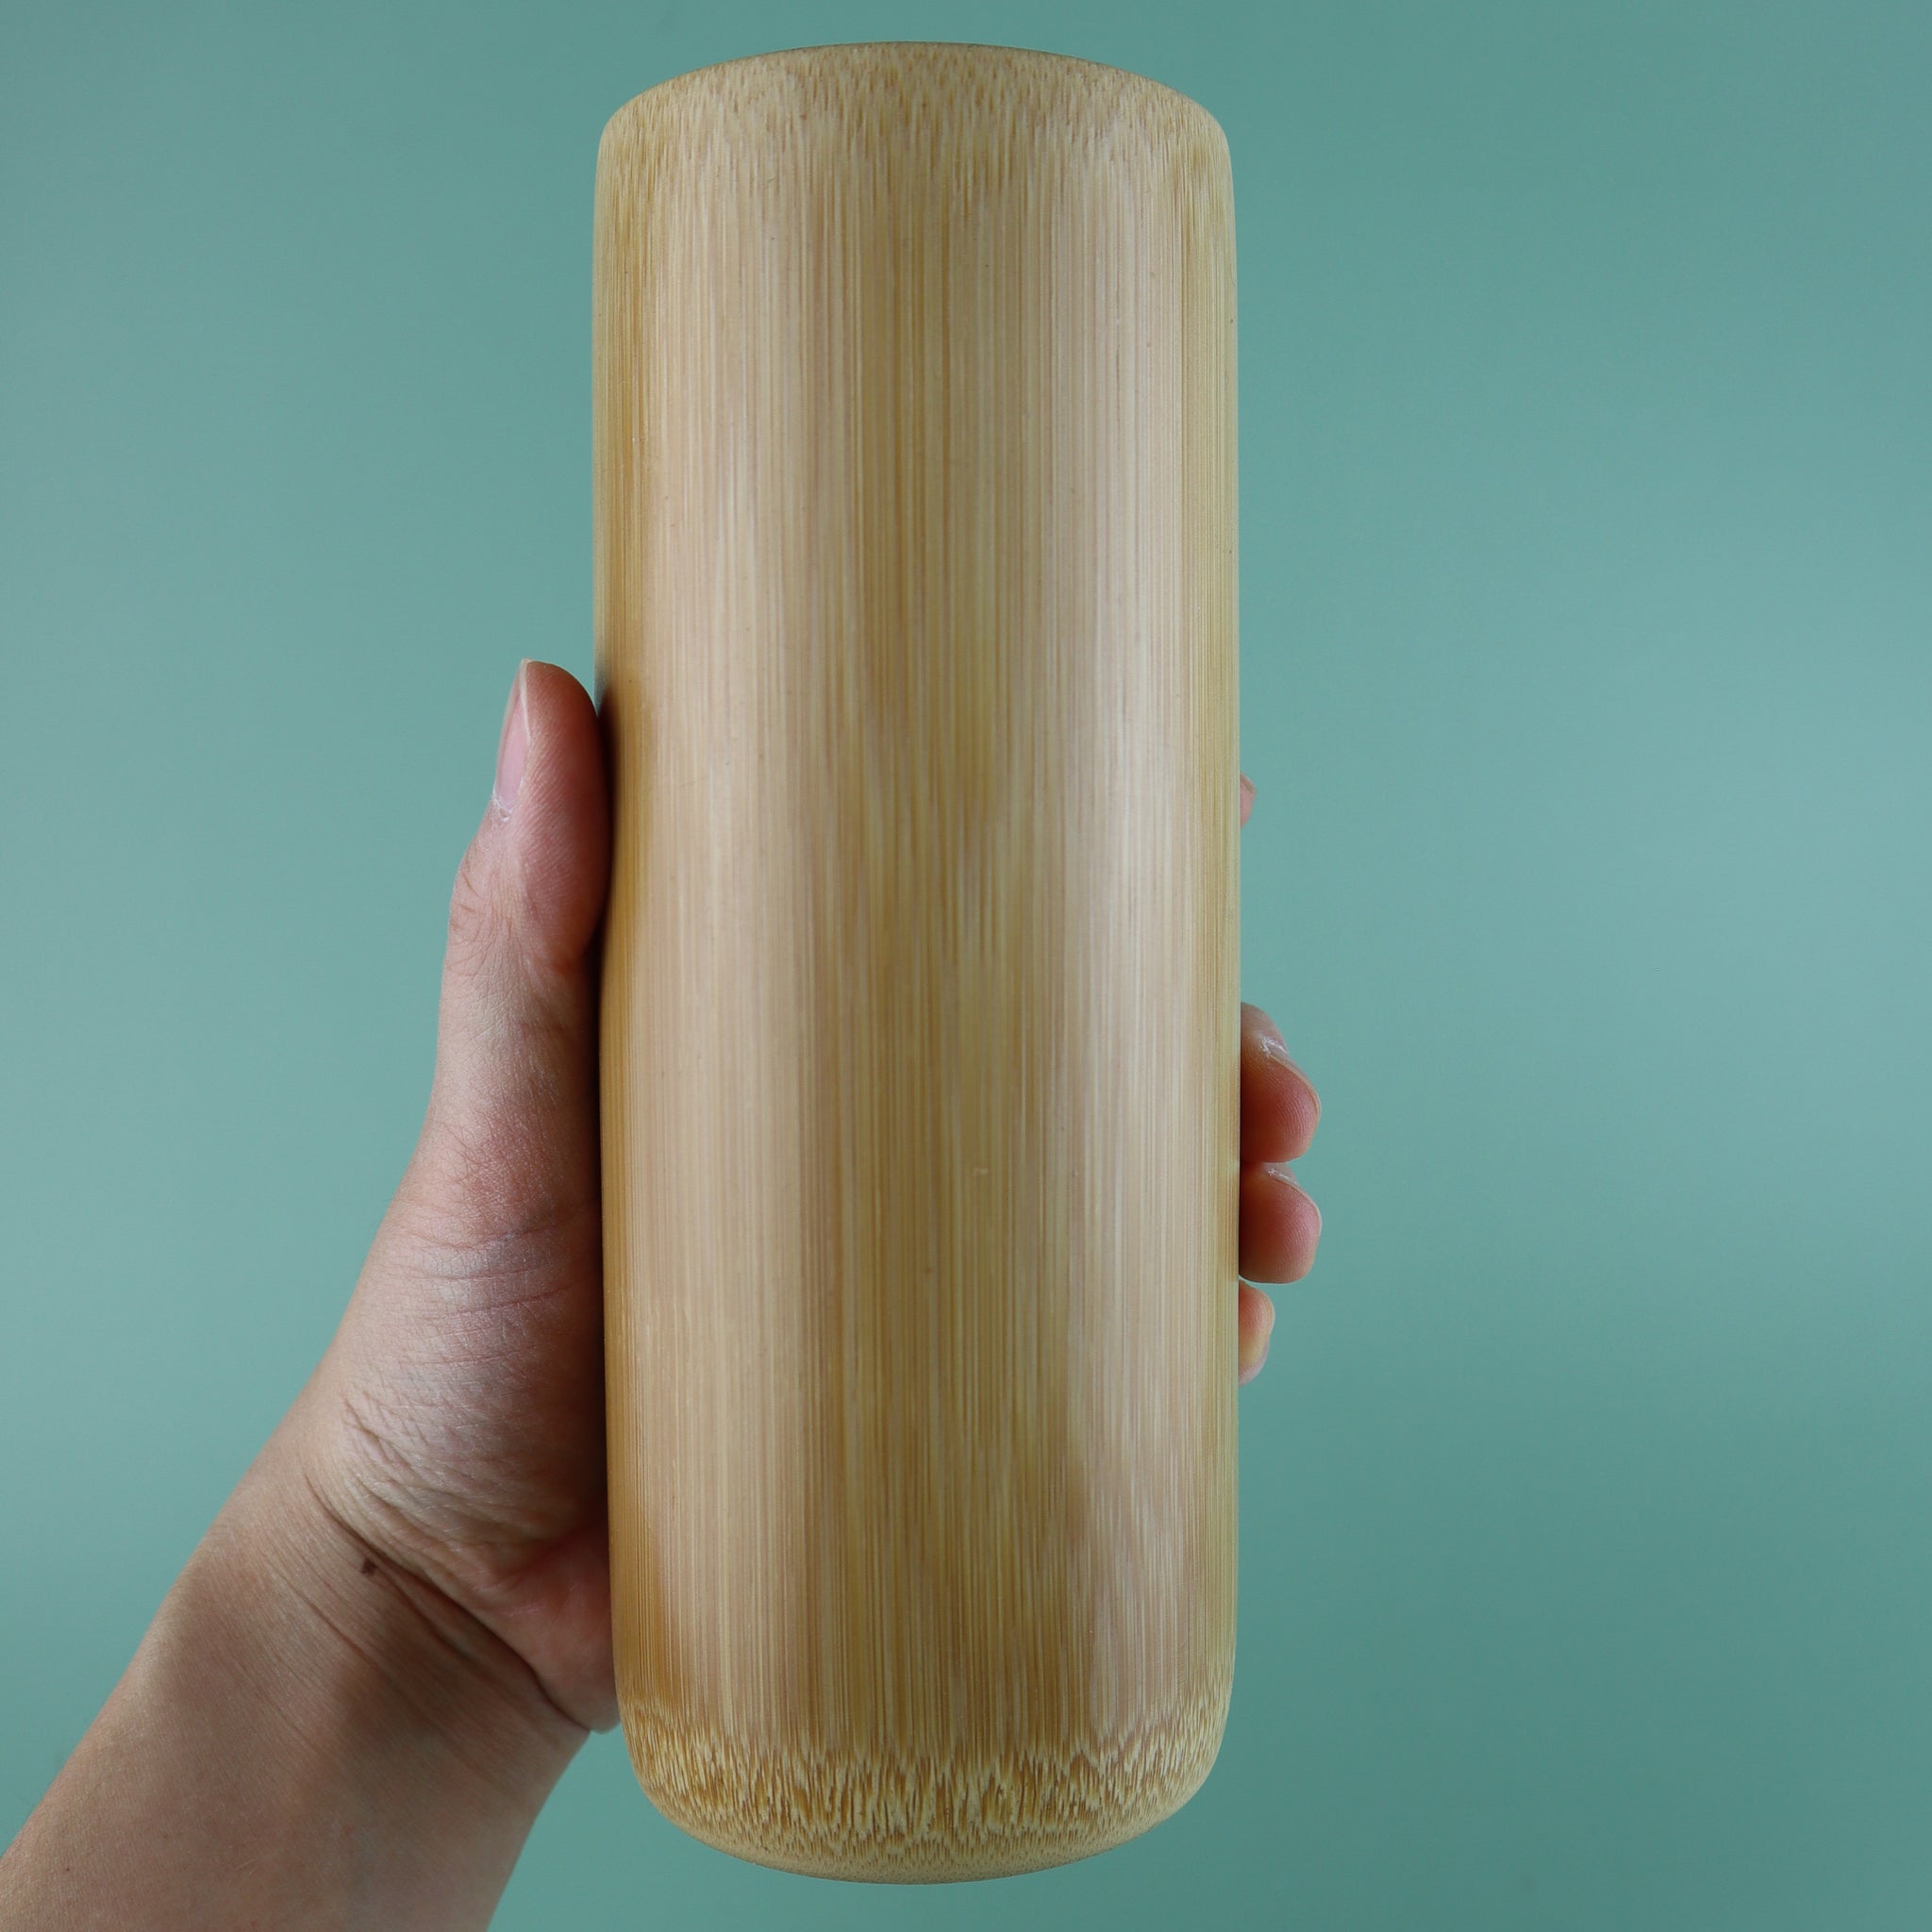 JUNGLE CULTURE BAMBOO TALL CUPS/VASE (HOLDS 17 OZ) - SMOOTHIES, COCKTAILS, DECORATION VASE